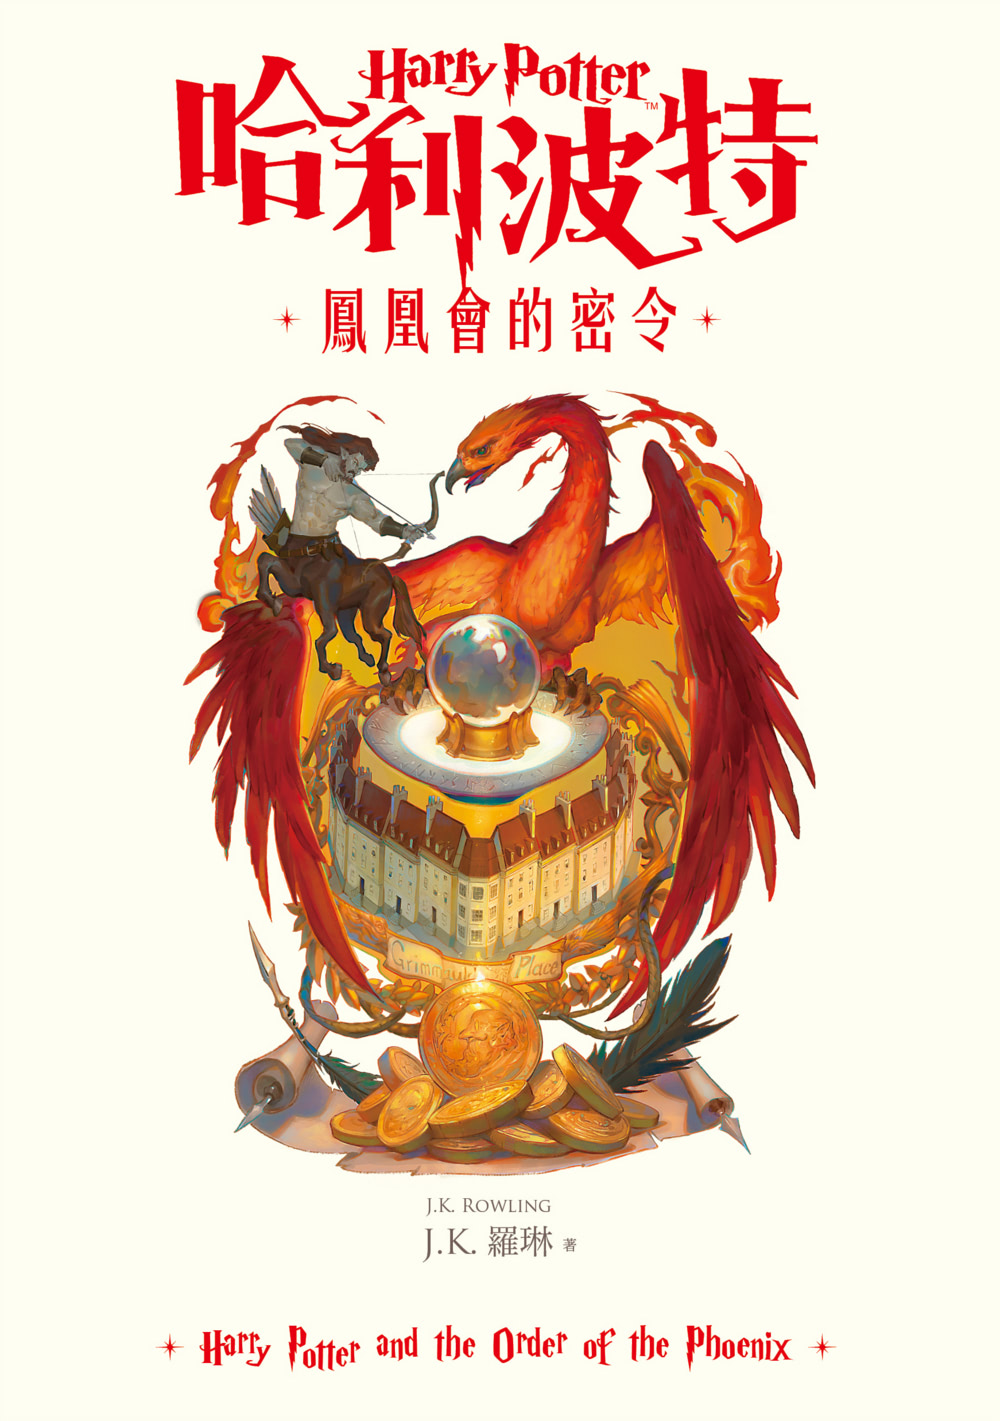 ‘Order of the Phoenix’ Traditional Chinese 20th anniversary edition